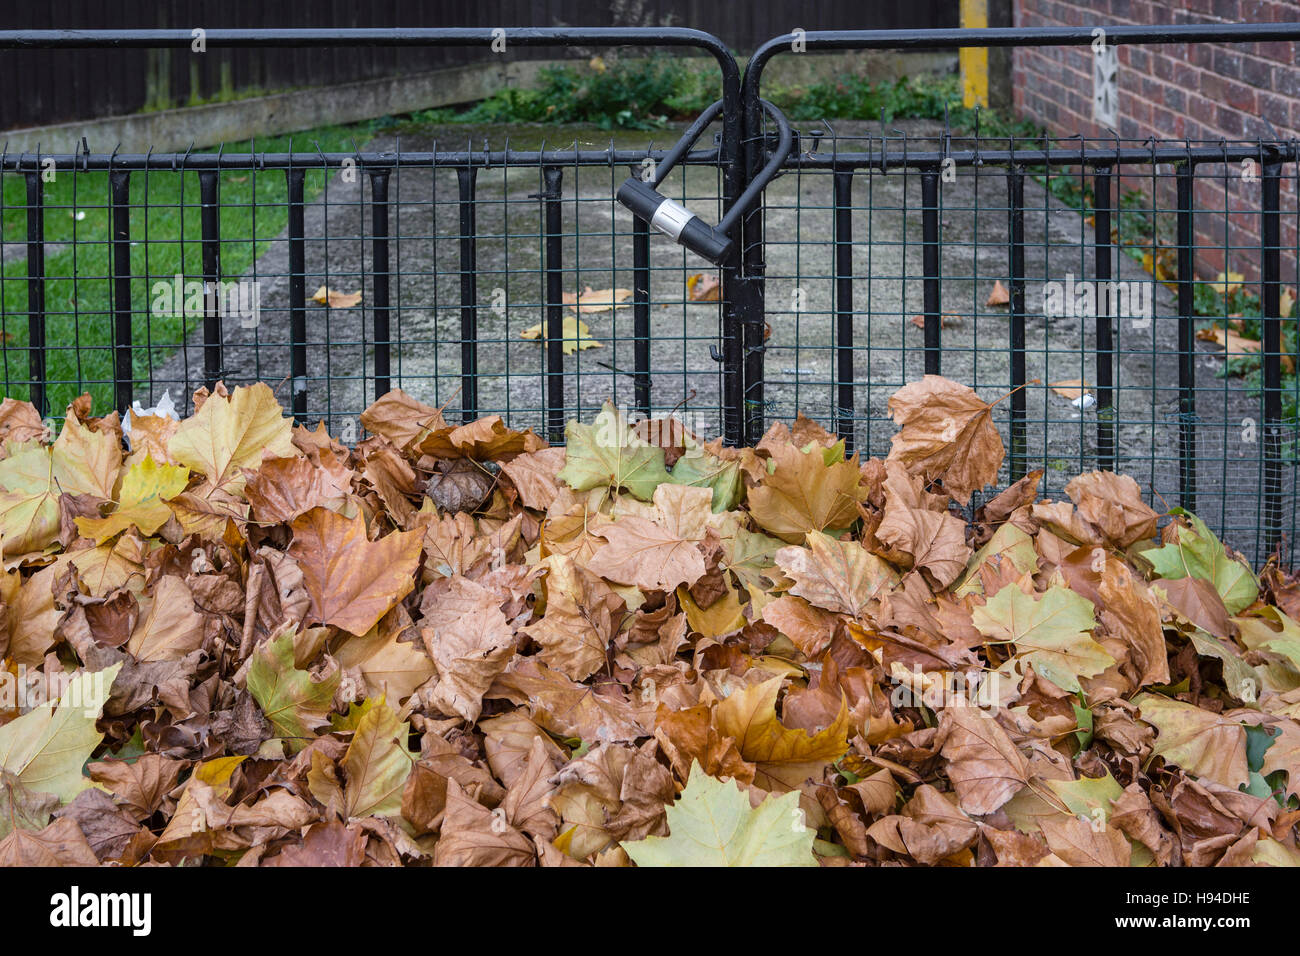 Dead autumn leaves piled up against an iron railing fence and gate, locked with a D lock. Stock Photo